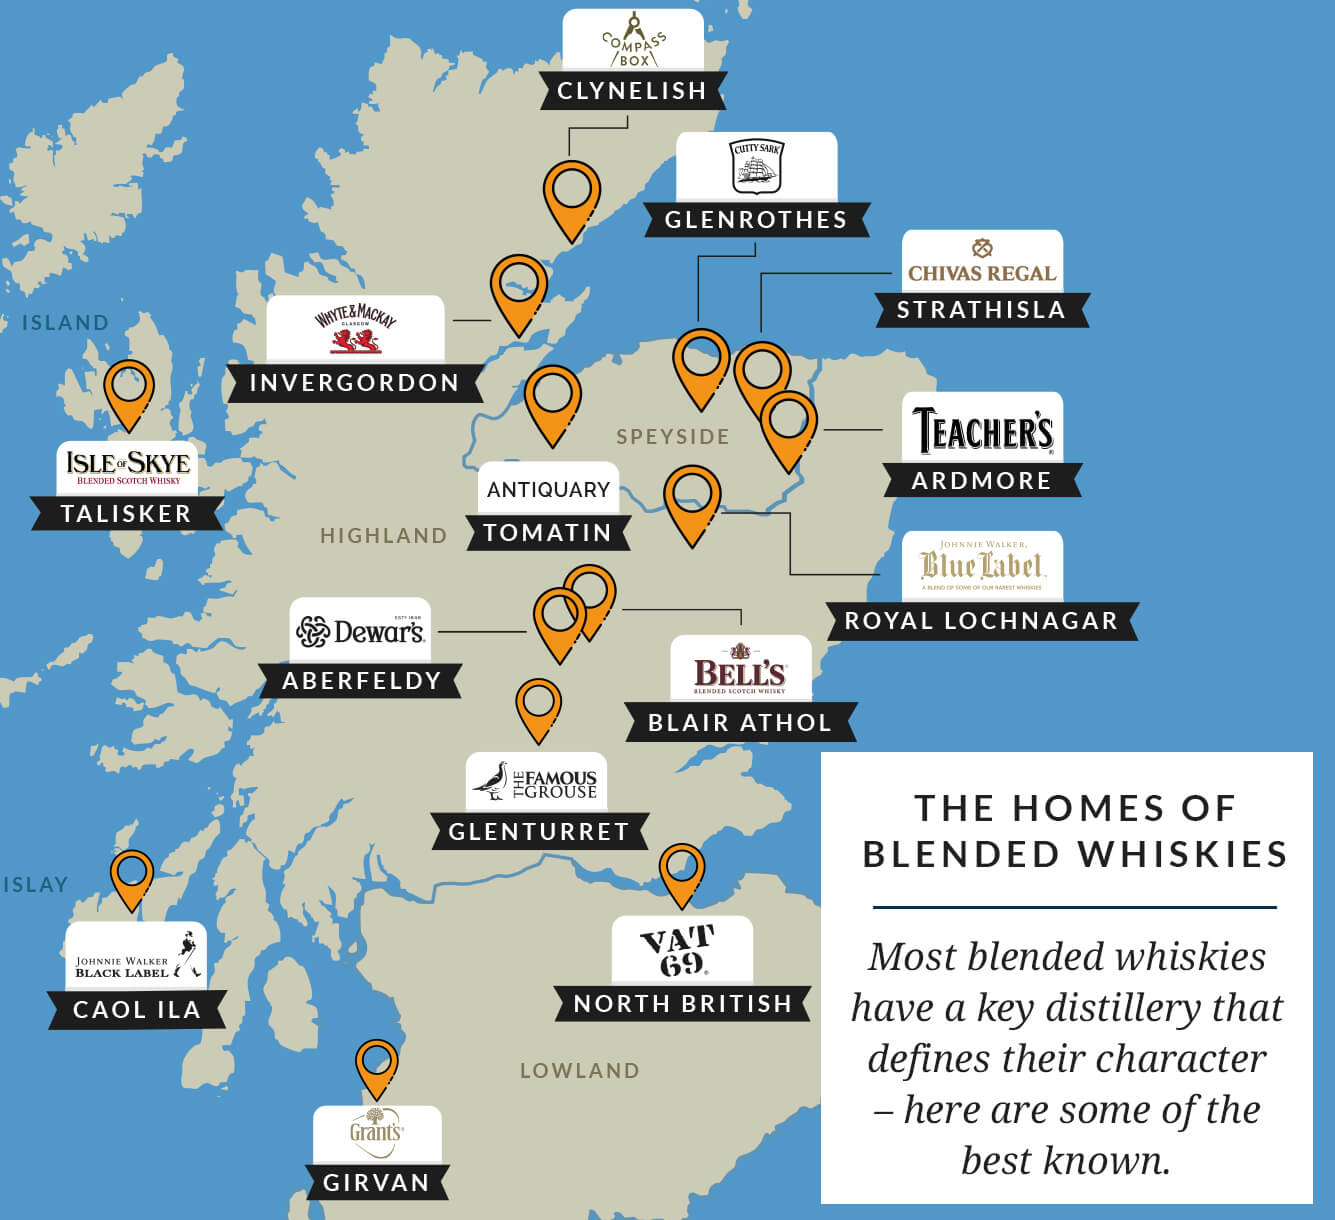 The homes of blended whiskies – Most blended whiskies have a key distillery that defines their character – here are some of the best known